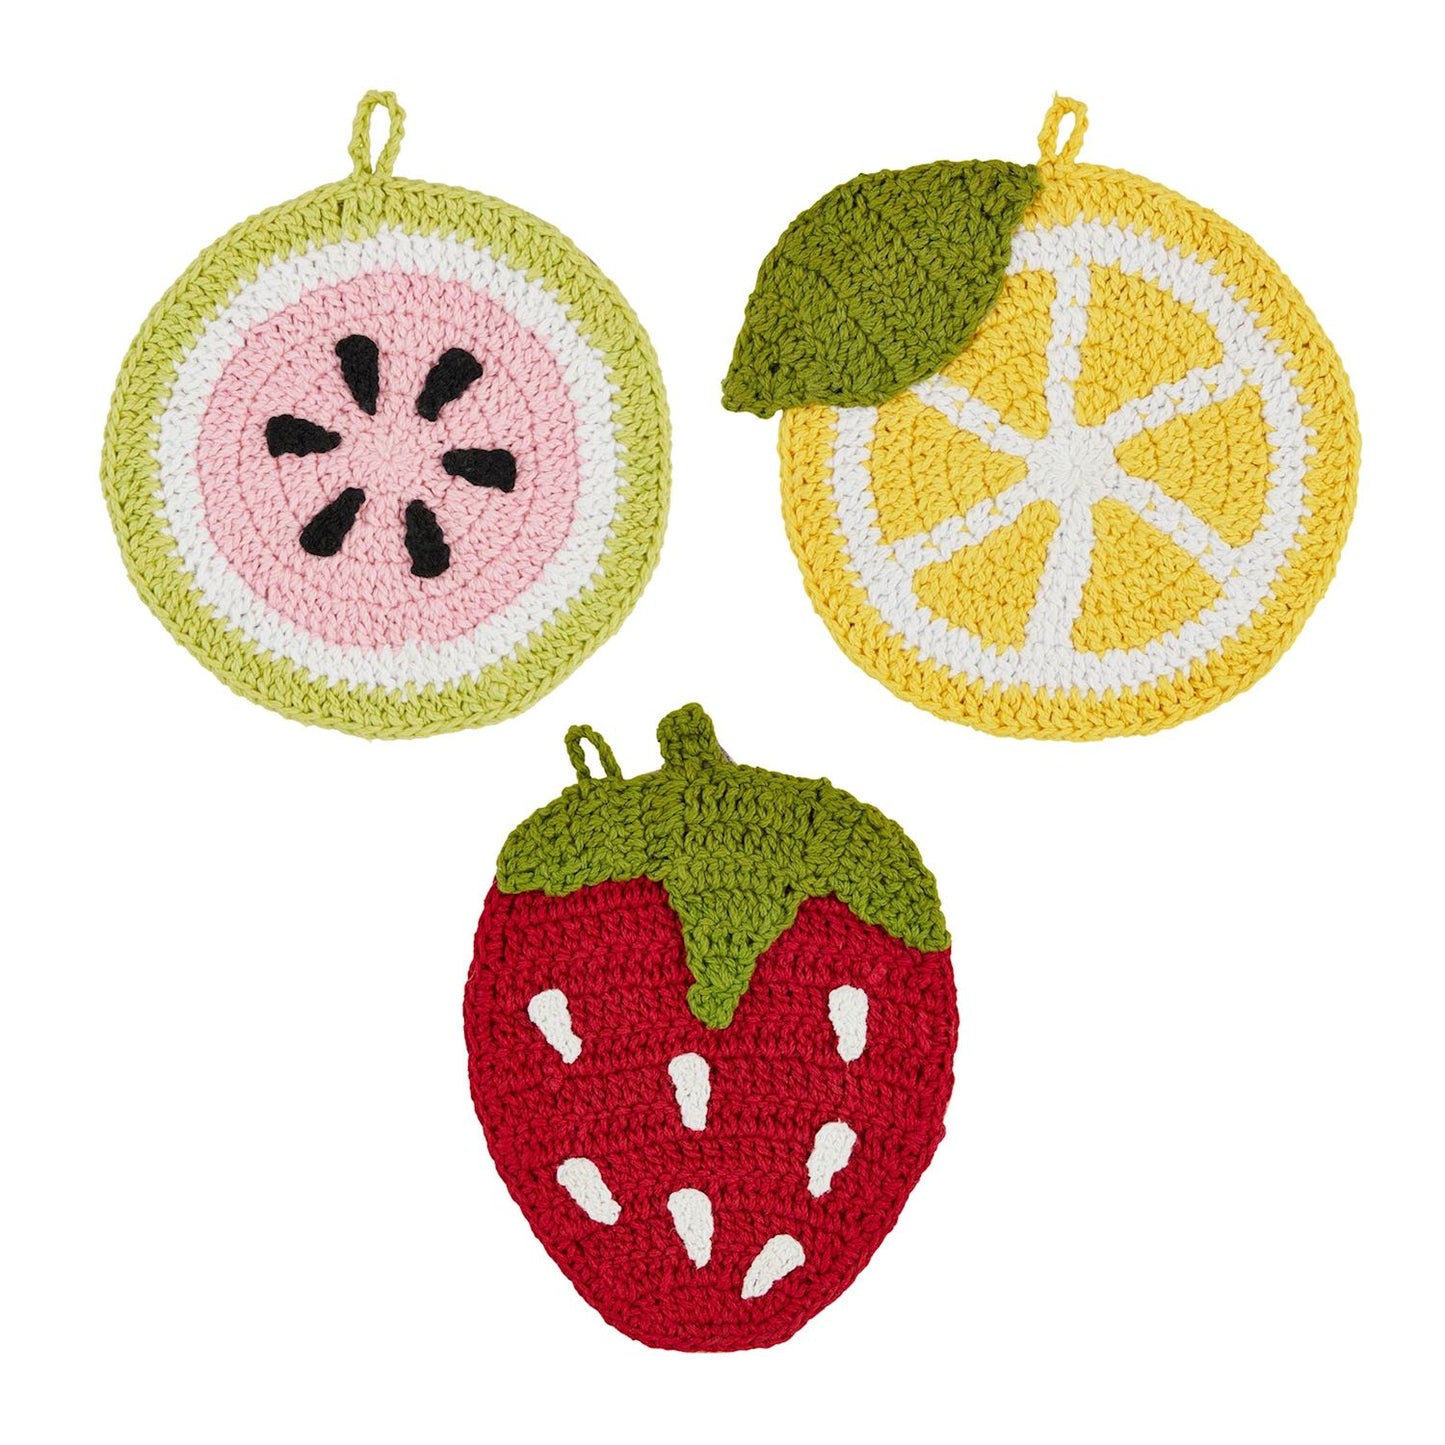 3 styles of crocheted fruit shaped trivets on a white background.